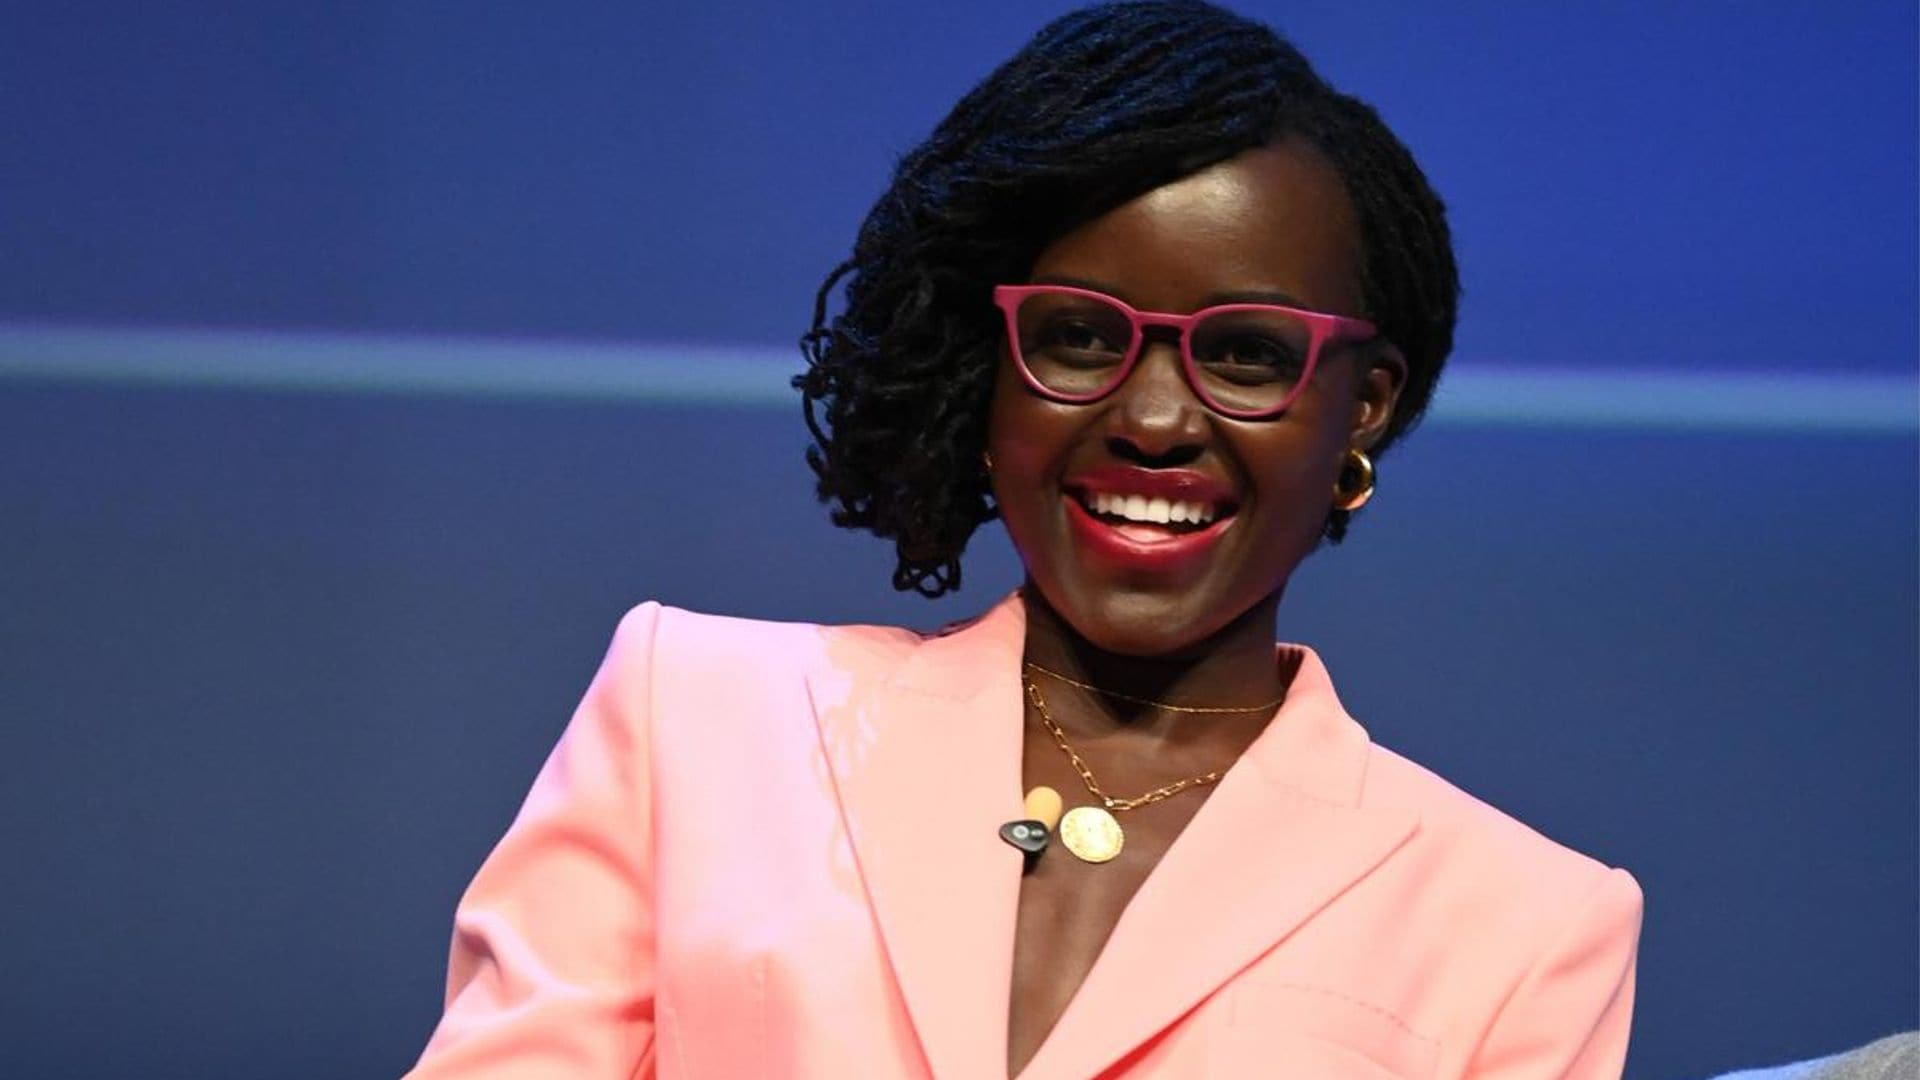 Lancôme and Lupita Nyong’o help a group of students advances their careers with a scholarship